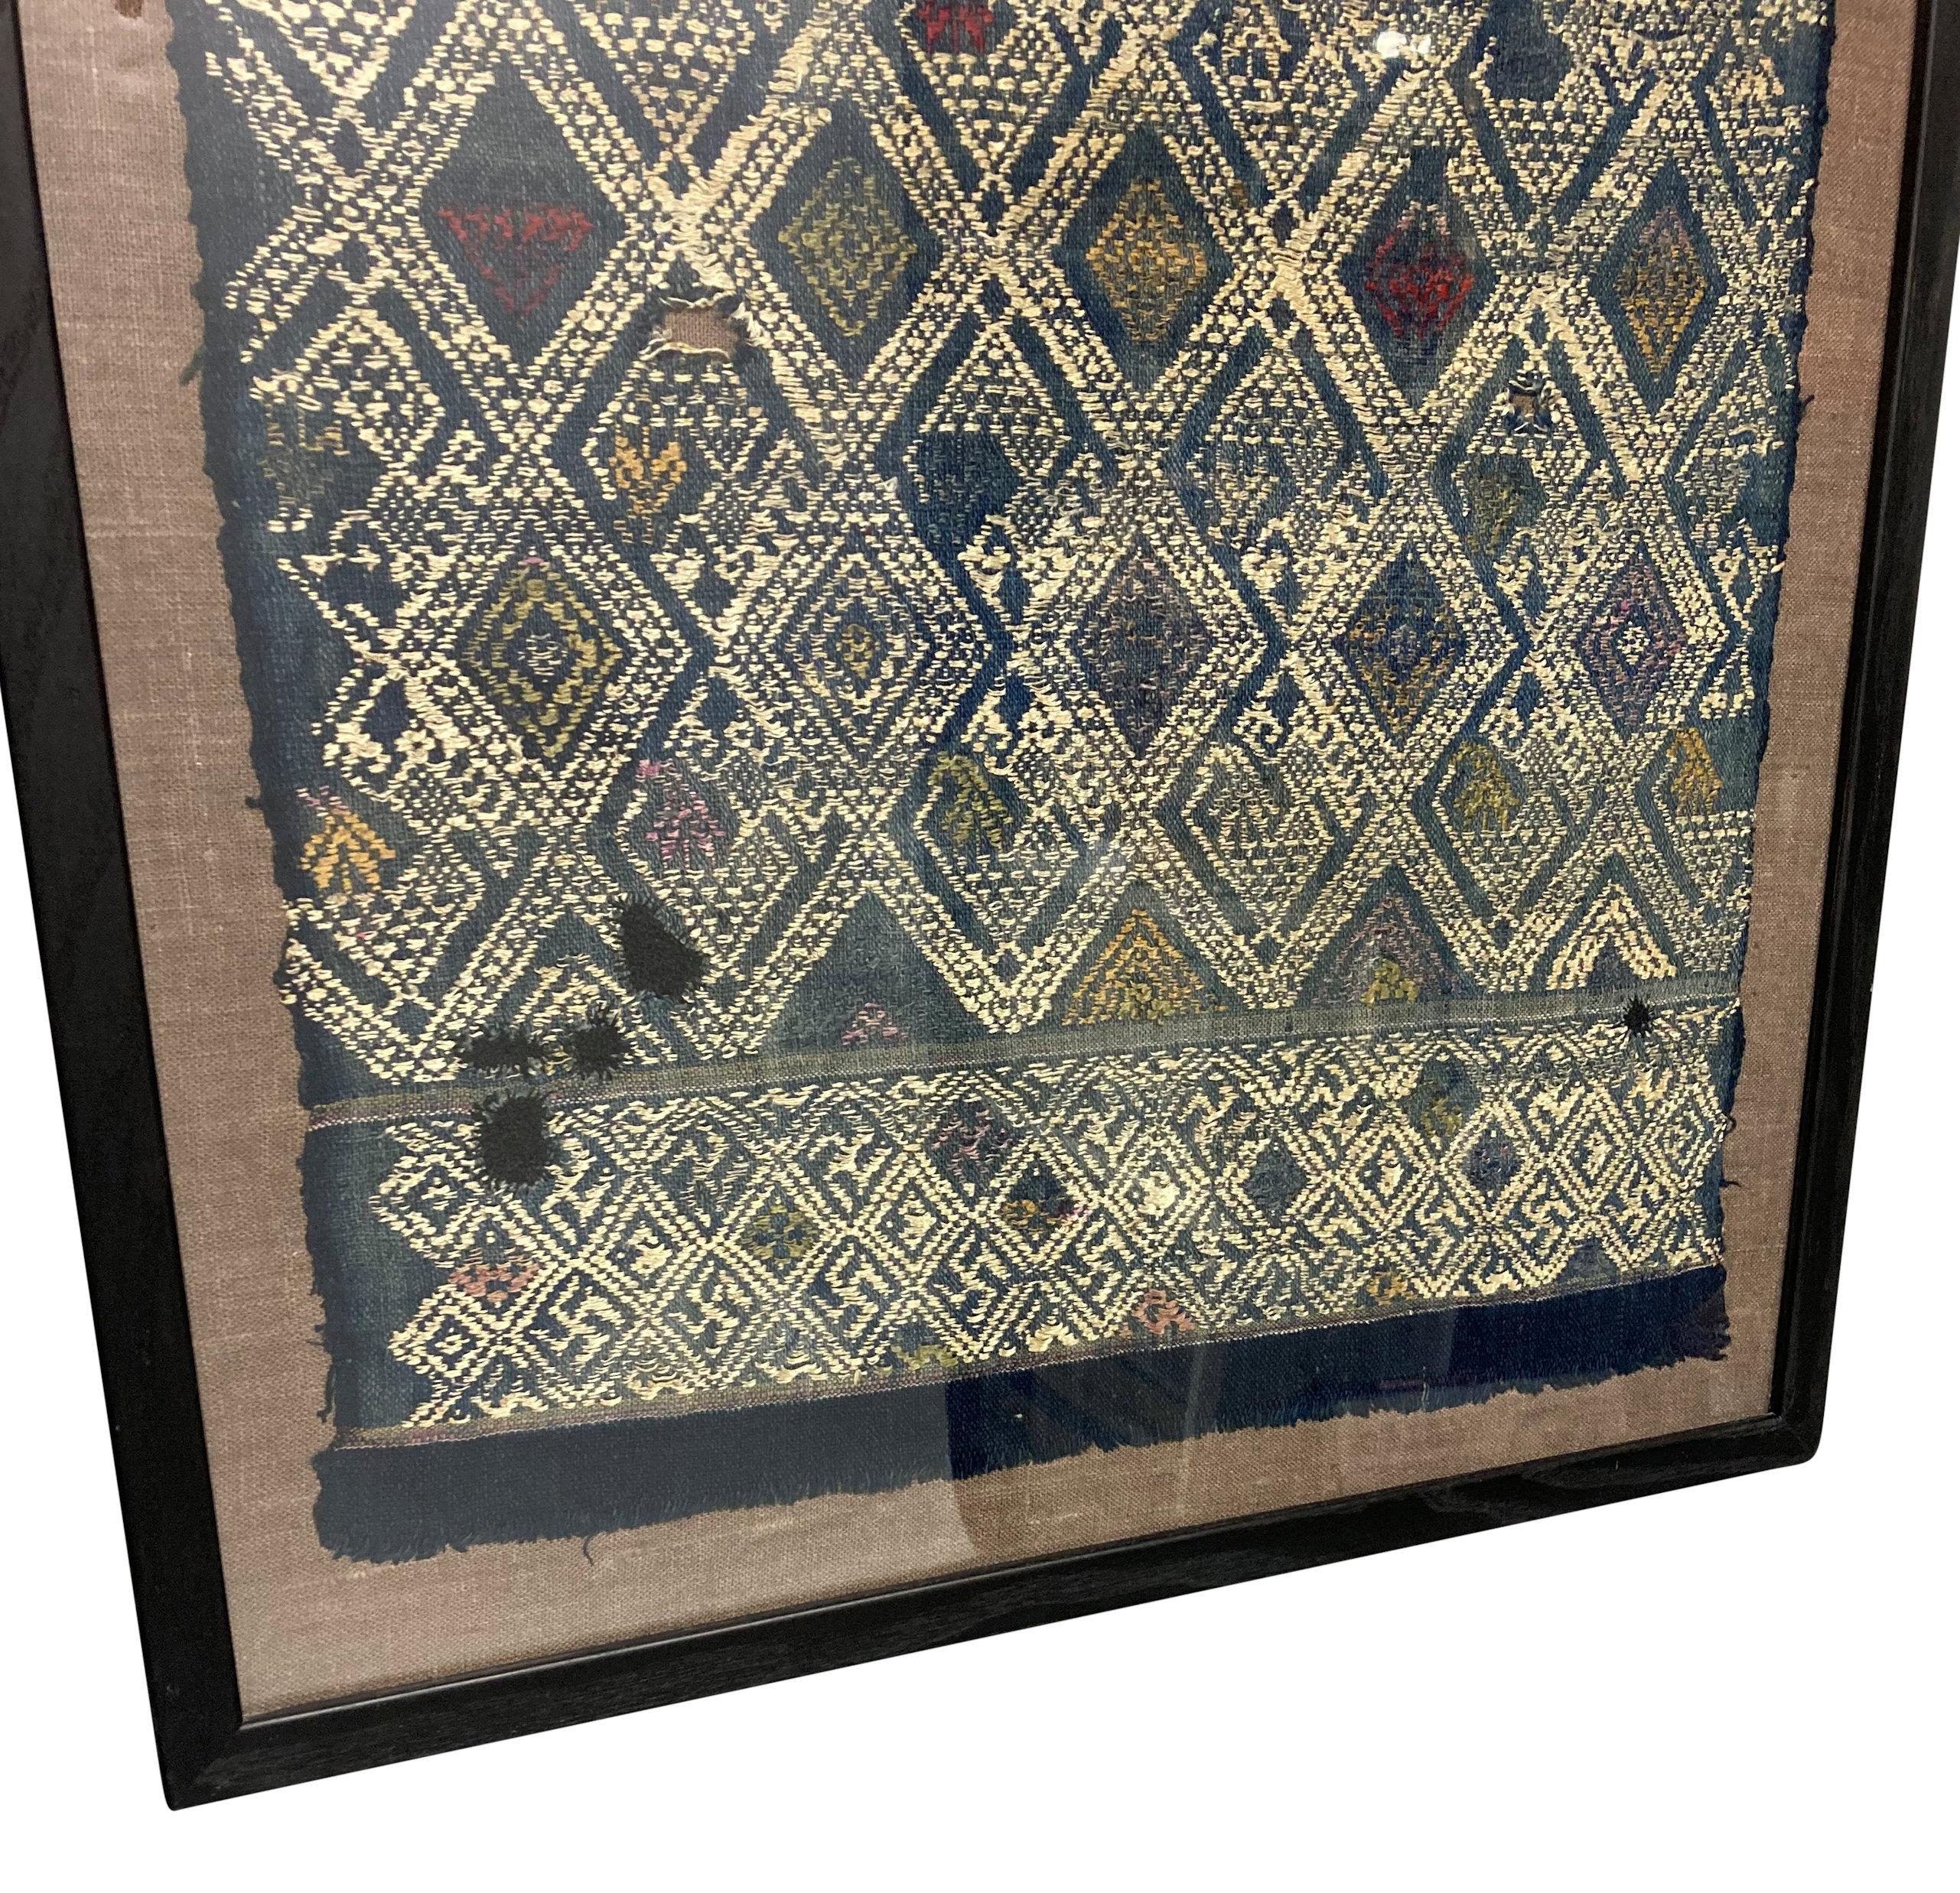 A Chinese, traditional hand-woven textile from the southwestern Guiqzou Province. Framed behind glass, against a raw linen background.